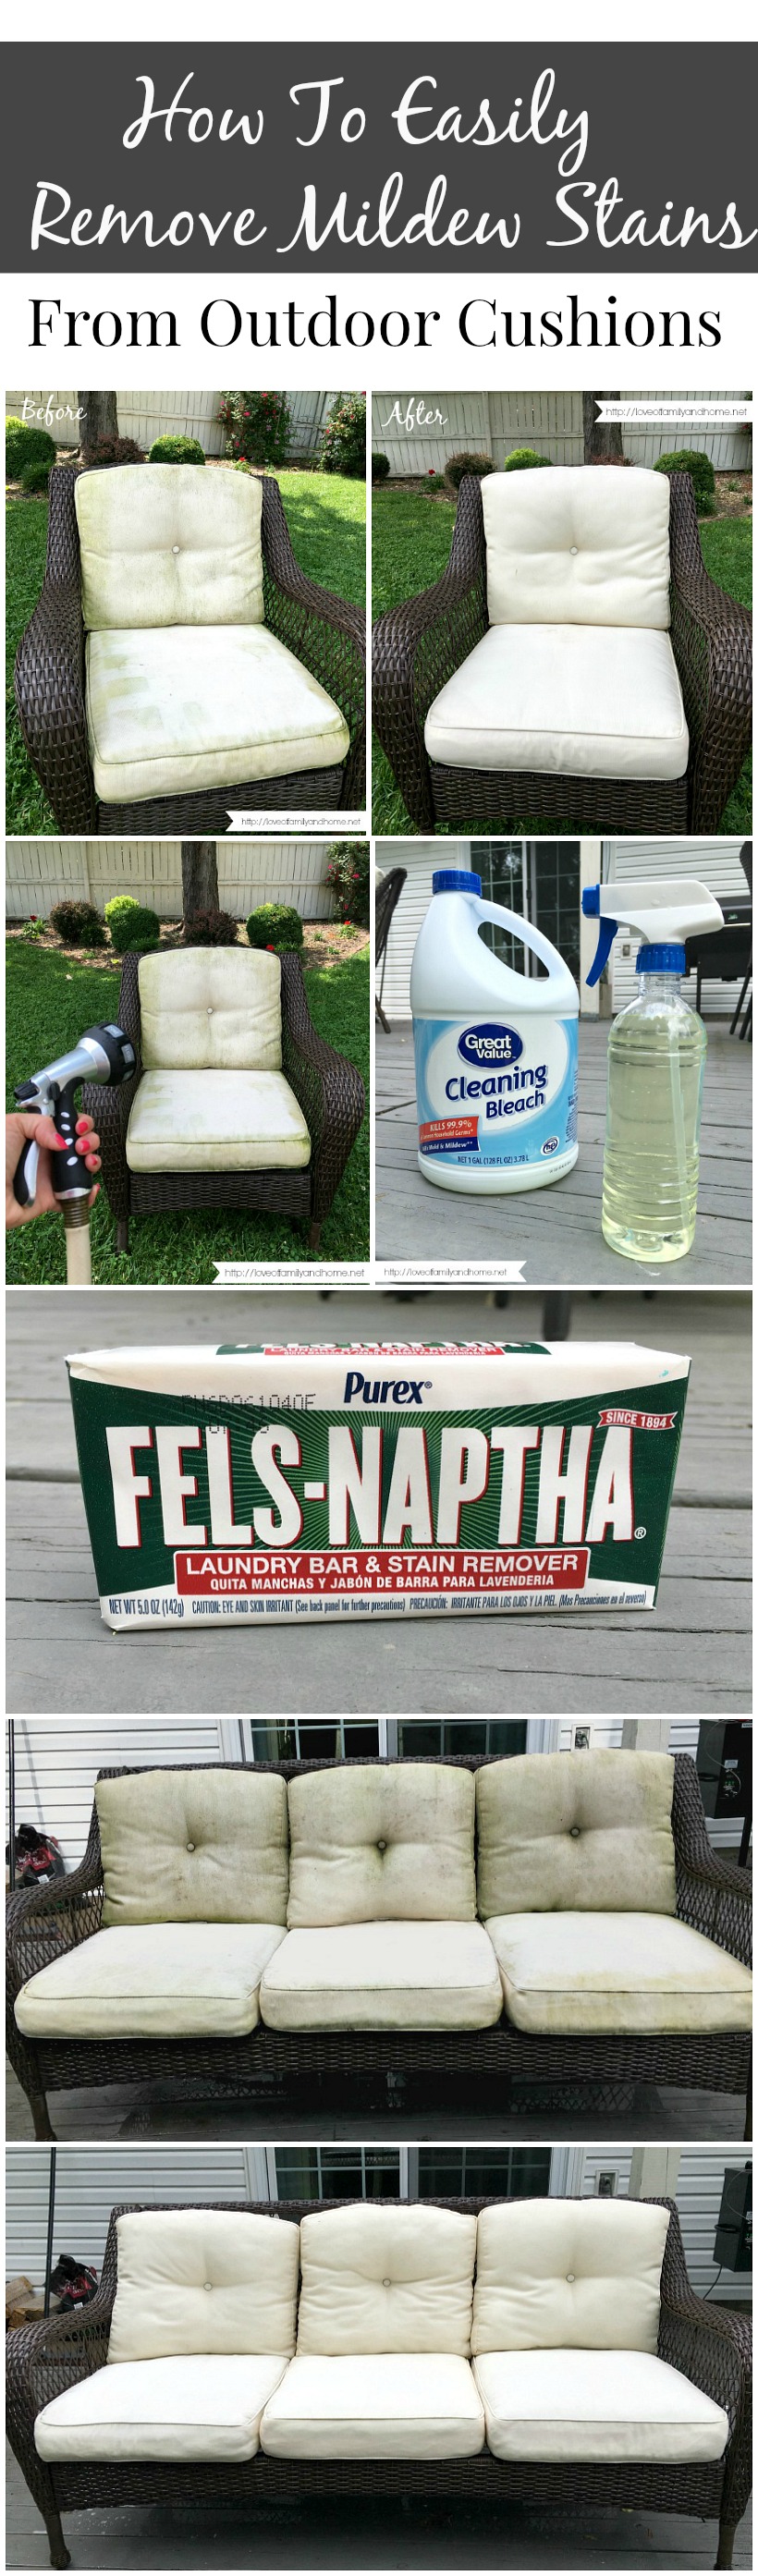 Remove Mildew Stains From Outdoor Cushions, How To Get Mildew Off Outdoor Cushion Covers